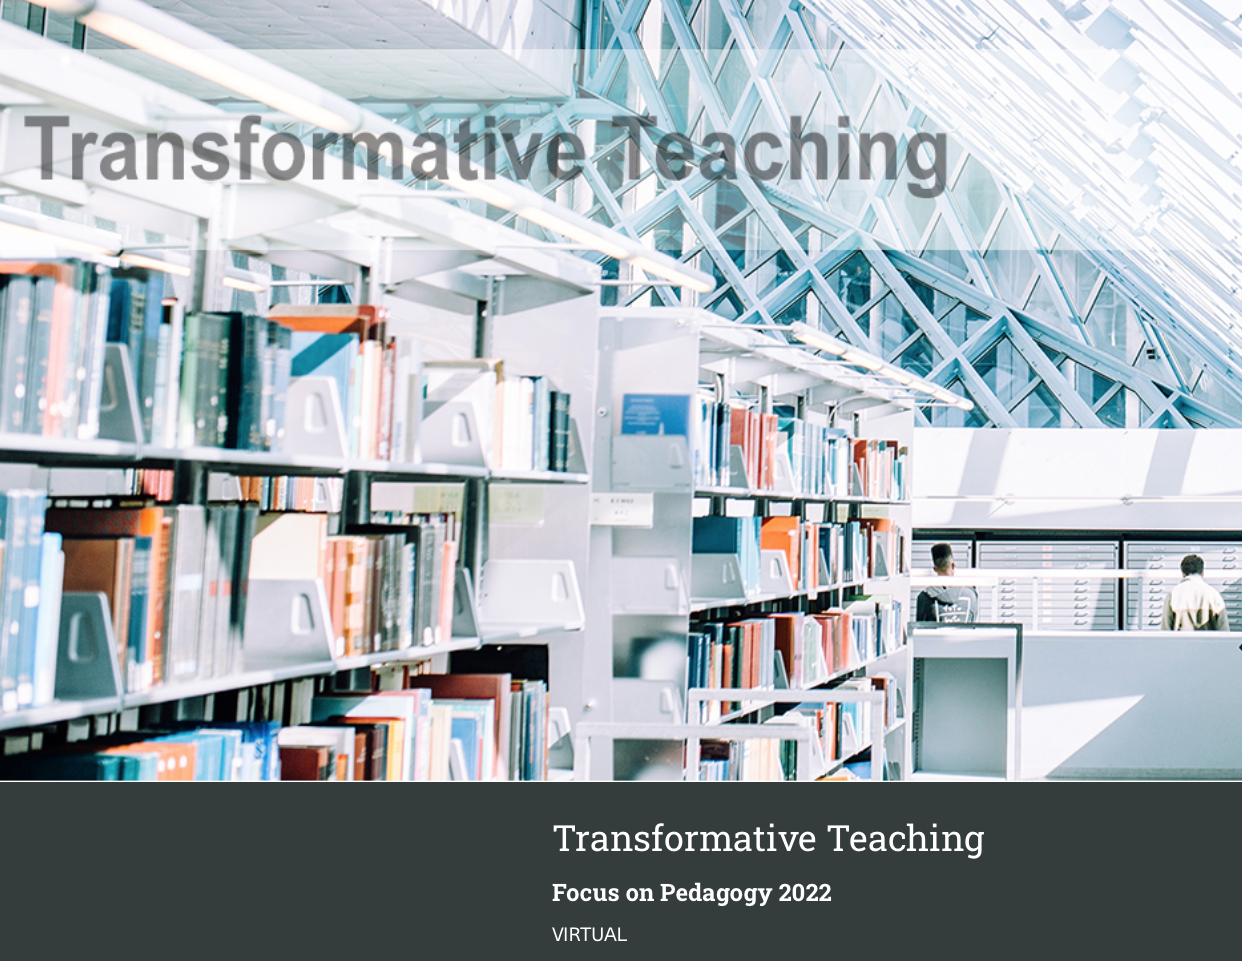 Presenting at the 'Transformative Teaching' conference is association with Dundee University and Zayed university 